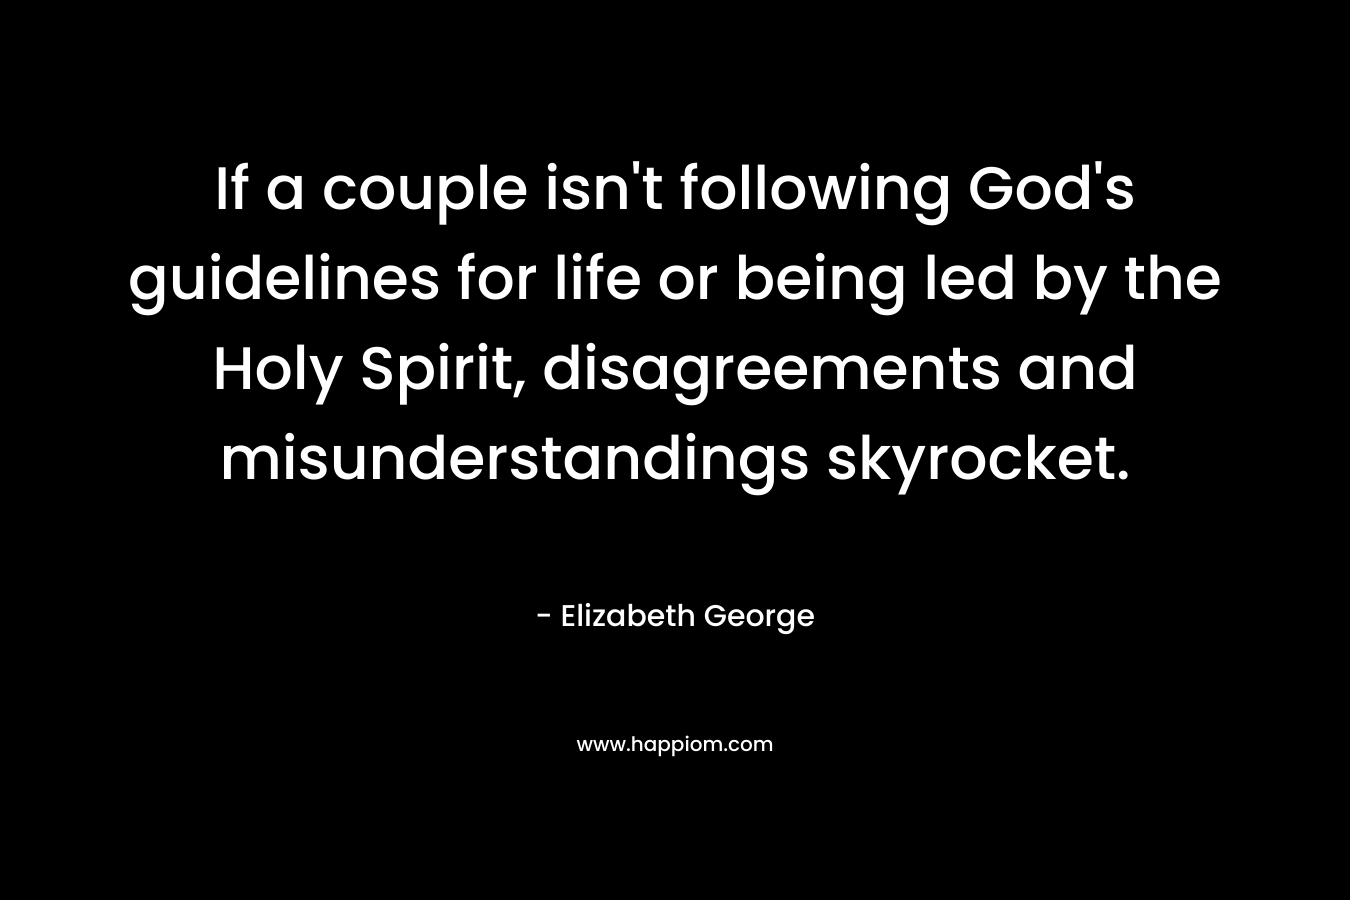 If a couple isn’t following God’s guidelines for life or being led by the Holy Spirit, disagreements and misunderstandings skyrocket. – Elizabeth George